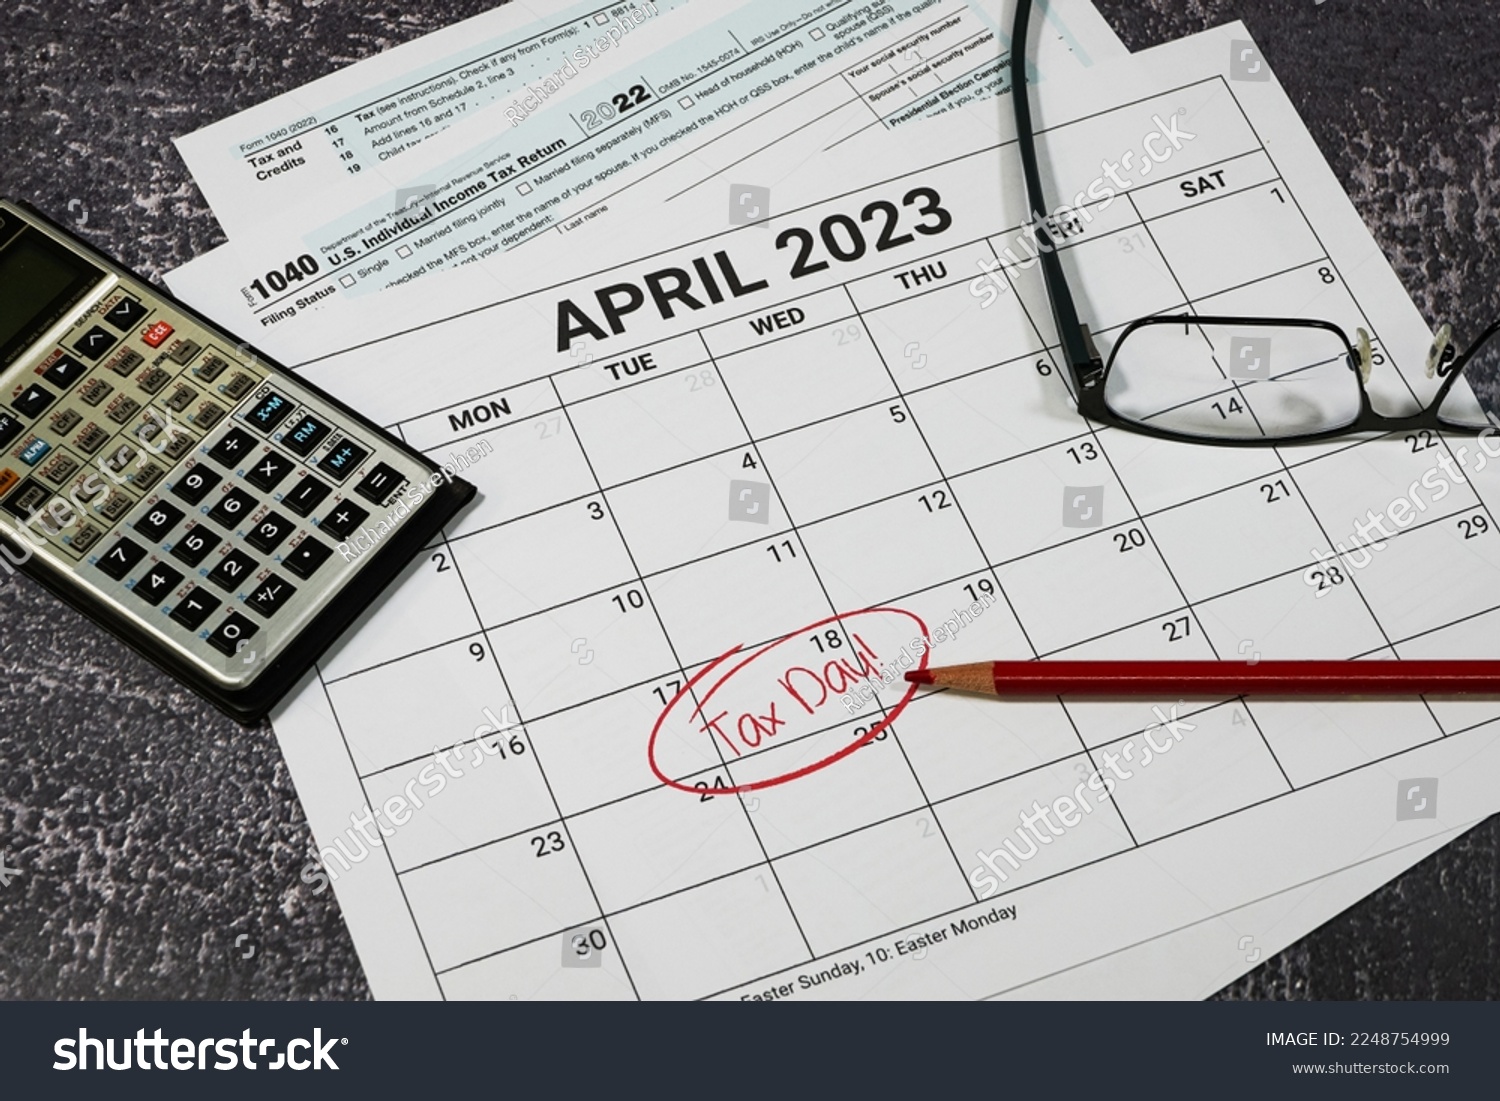 2023 US tax day calendar reminder with tax forms, calculator and glasses. #2248754999